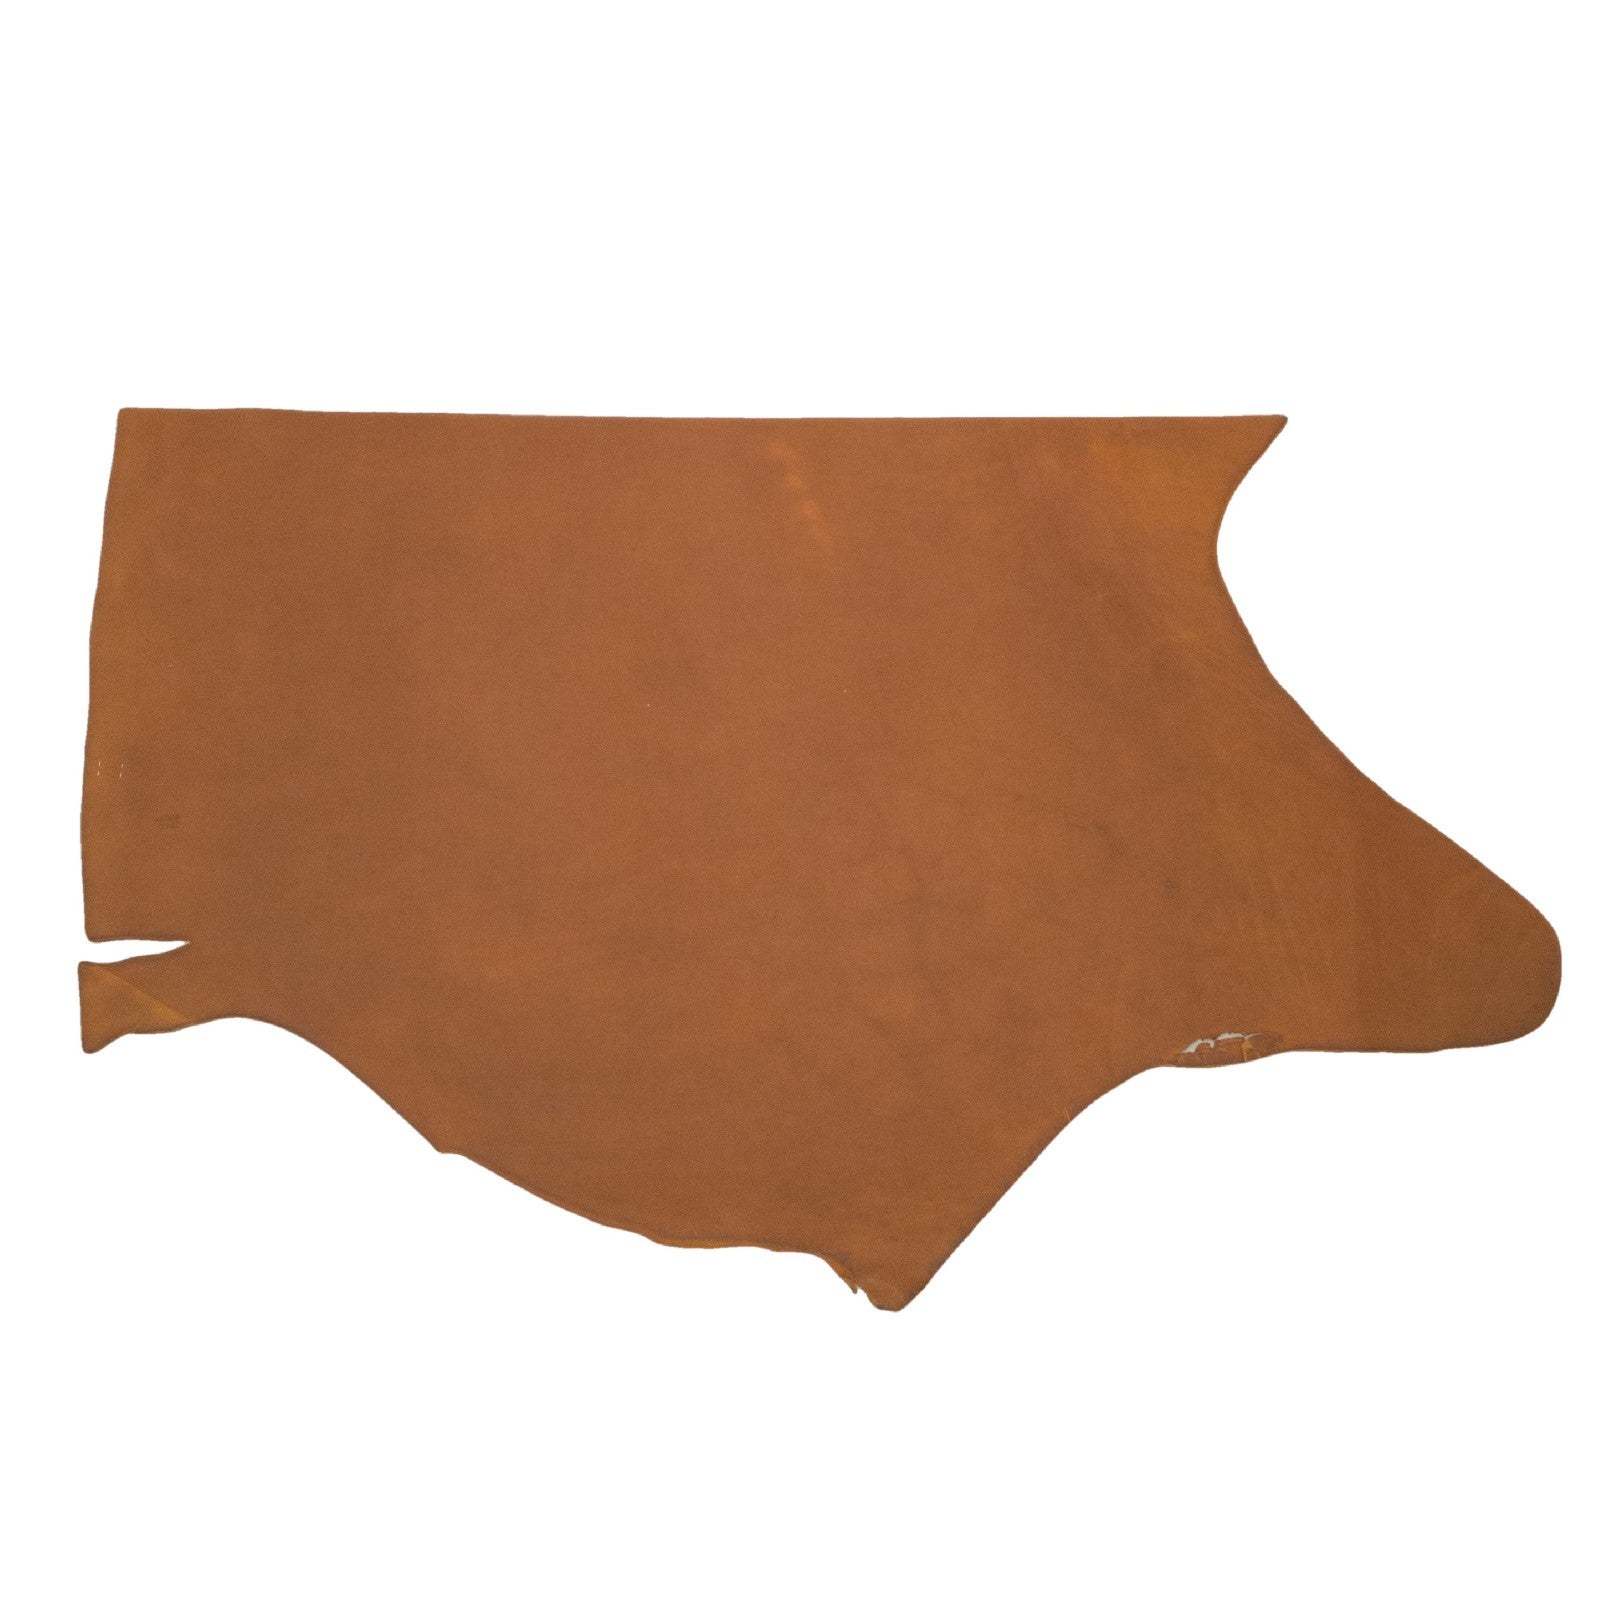 Authentic Light Oro Russet, SB Foot, Non-stock, 5-6oz, Oil Tanned Hides, Bottom Piece / 6.5 - 7.5 Sq Ft | The Leather Guy